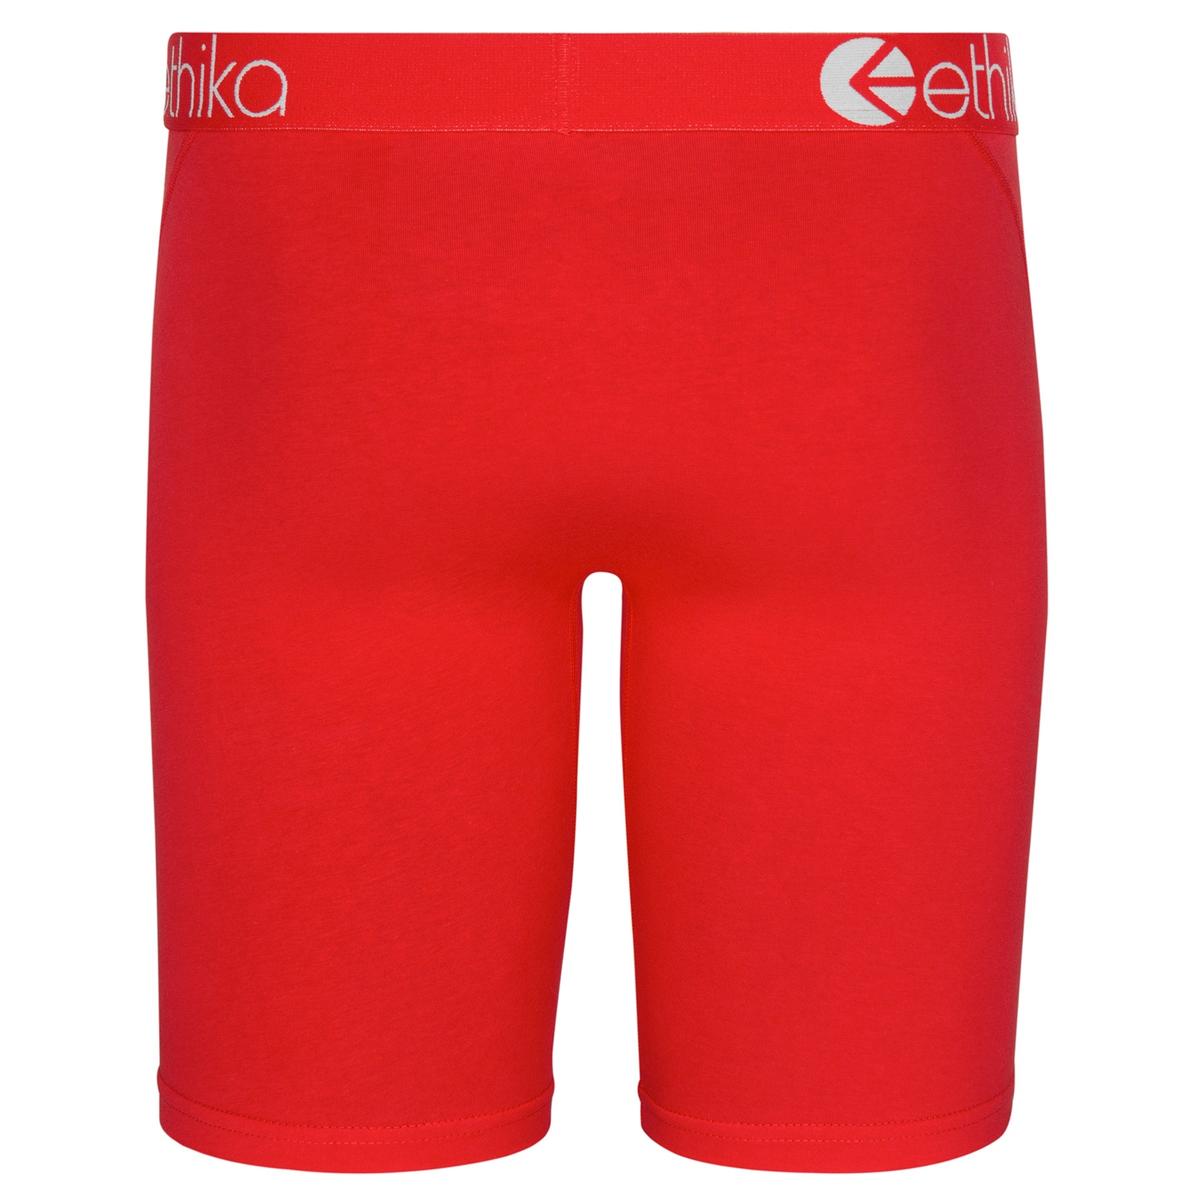 Red Ethika Underwear 3XL South Africa Factory Outlet - Ethika